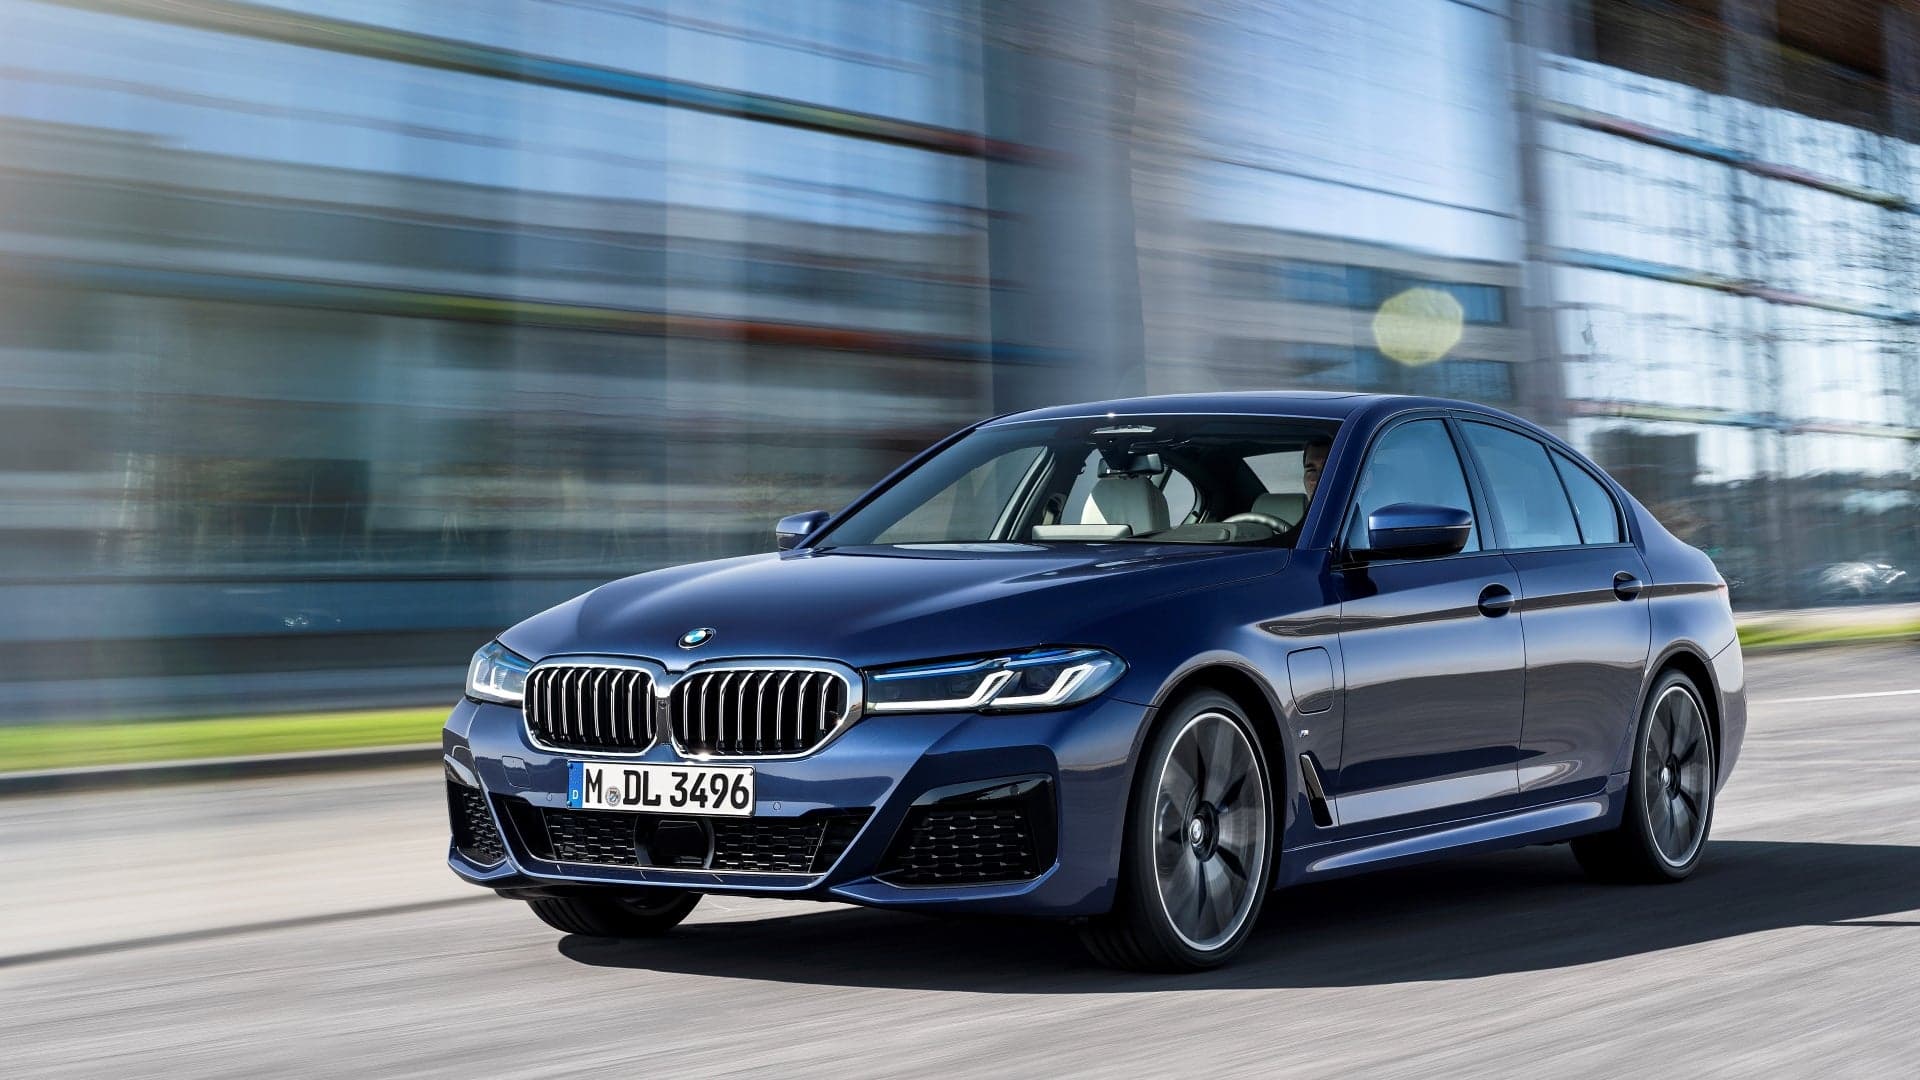 New 2021 BMW 5 Series Brings Sharper Looks, Mild-Hybrid System, and Larger Screens